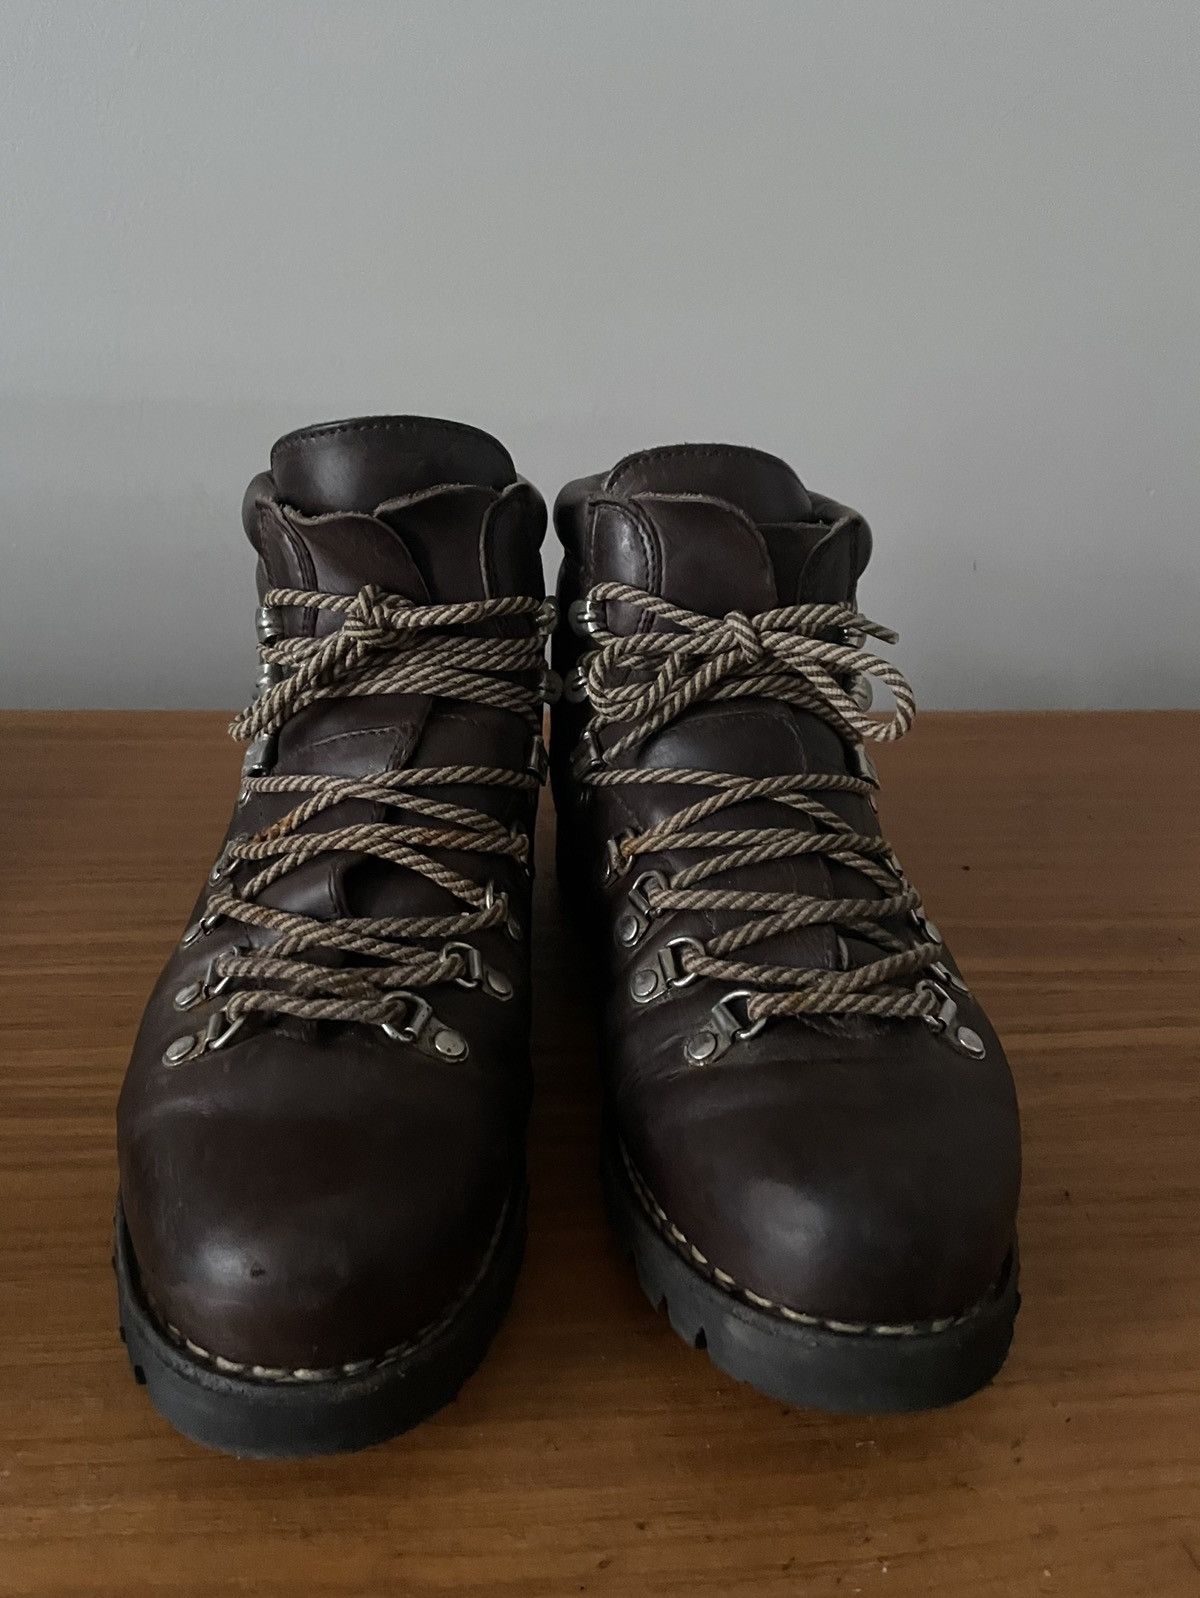 Paraboot Avioraz/Jannu Leather Hiking Boot Size US 8 / EU 41 - 2 Preview